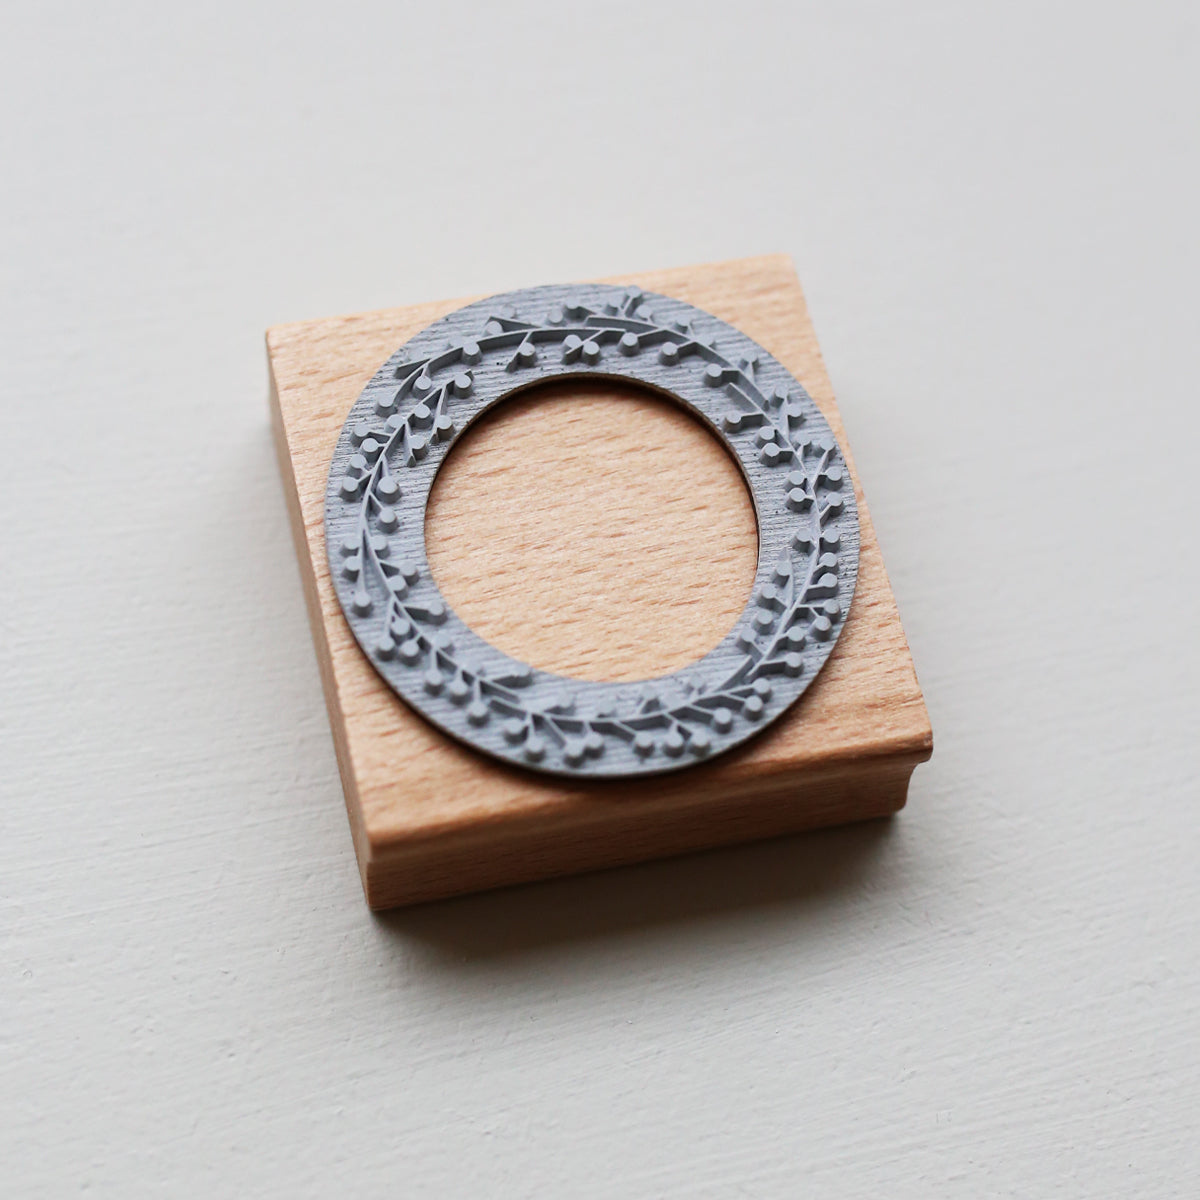 RUBBER STAMP // WREATH